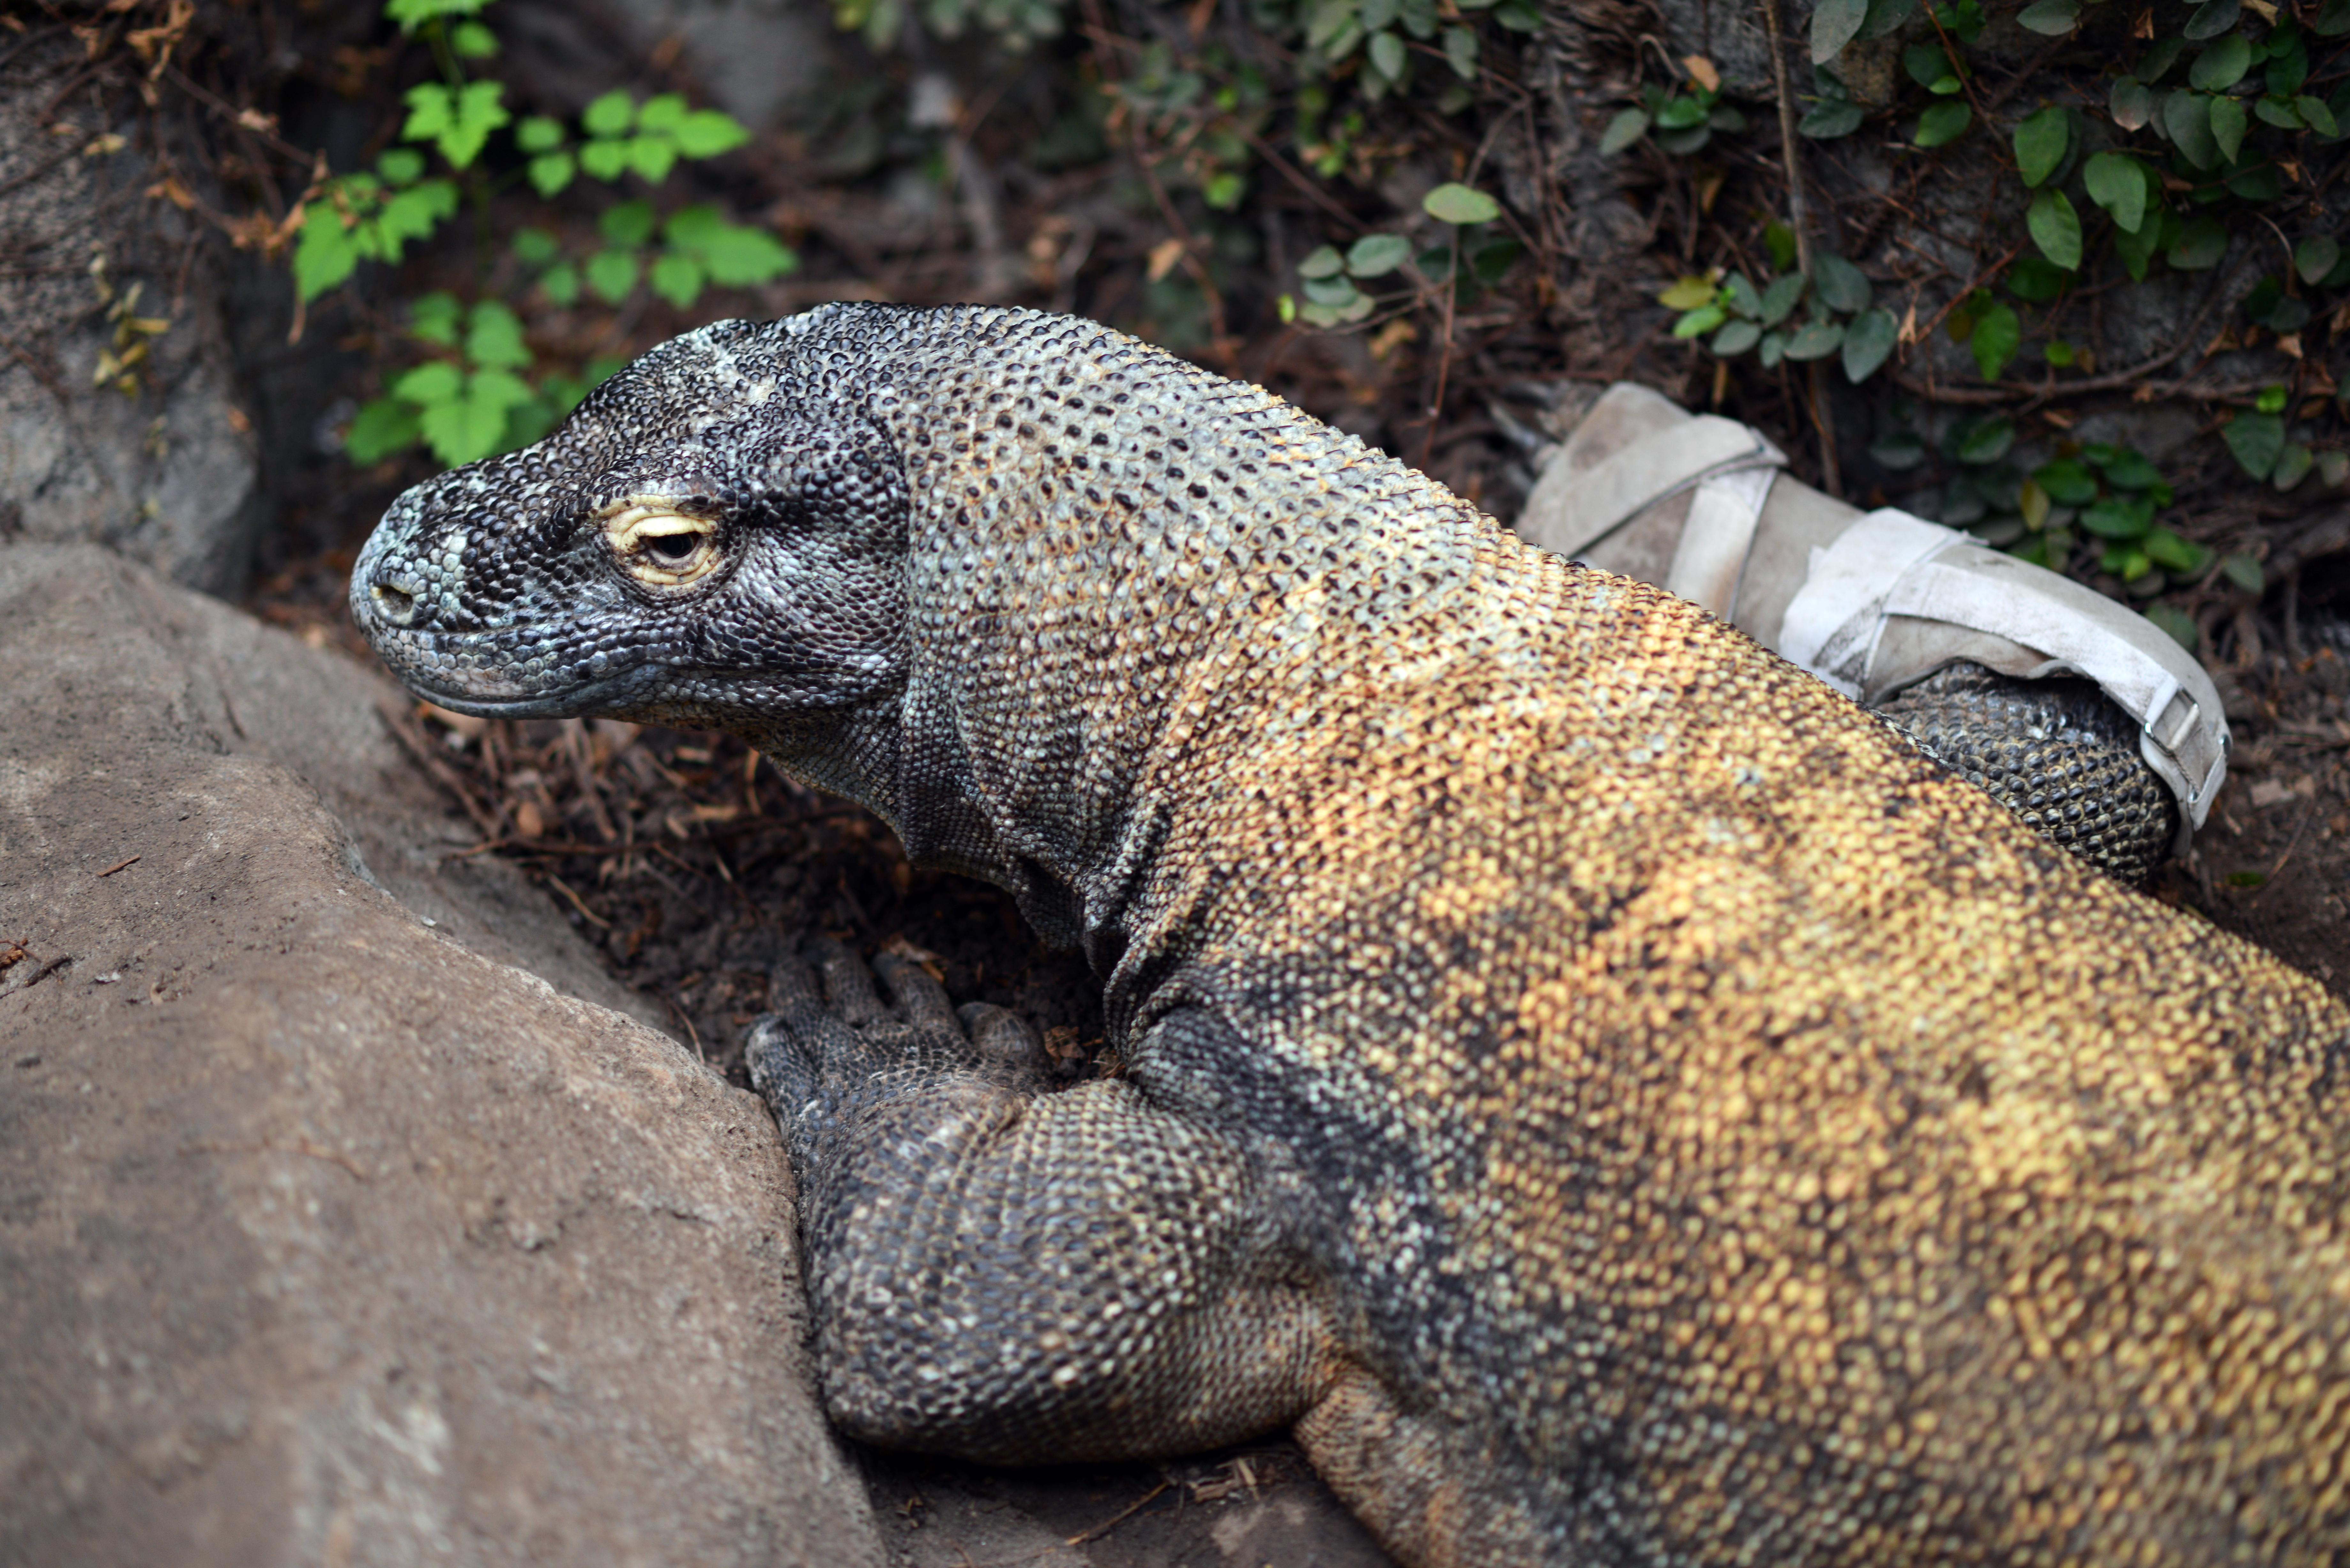 Baylor College of Medicine experts helped this Komodo dragon at the Houston Zoo maintain his mobility.